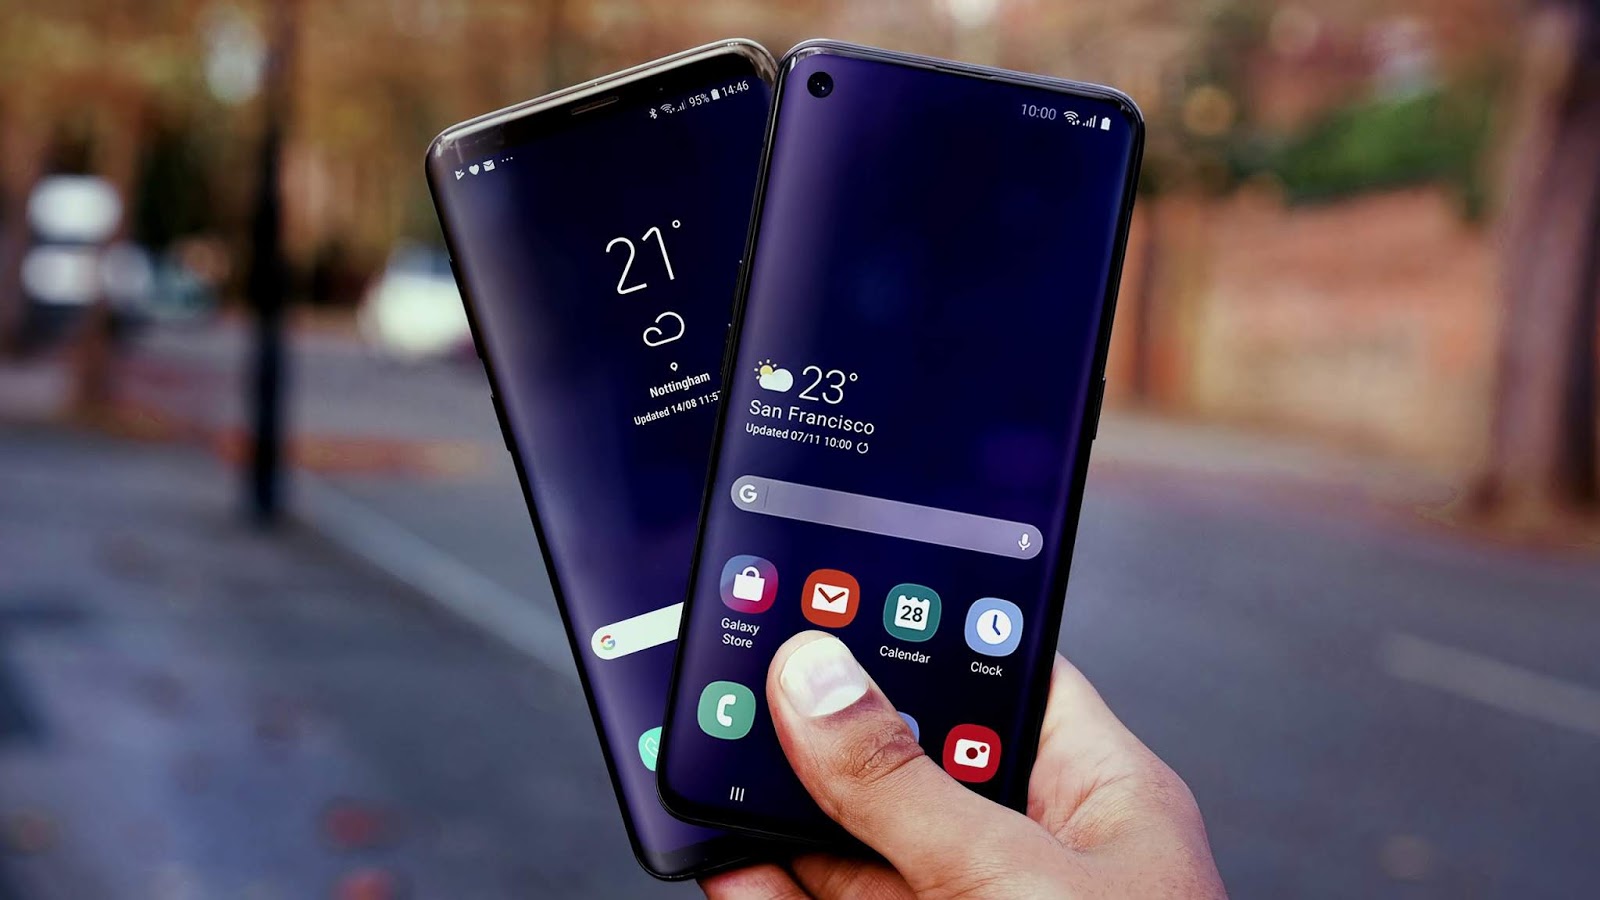  A hand holding two Samsung smartphones, the Galaxy S9 and Galaxy Note 9, with the upcoming Samsung Galaxy S10 and Galaxy Note 10 in the background.